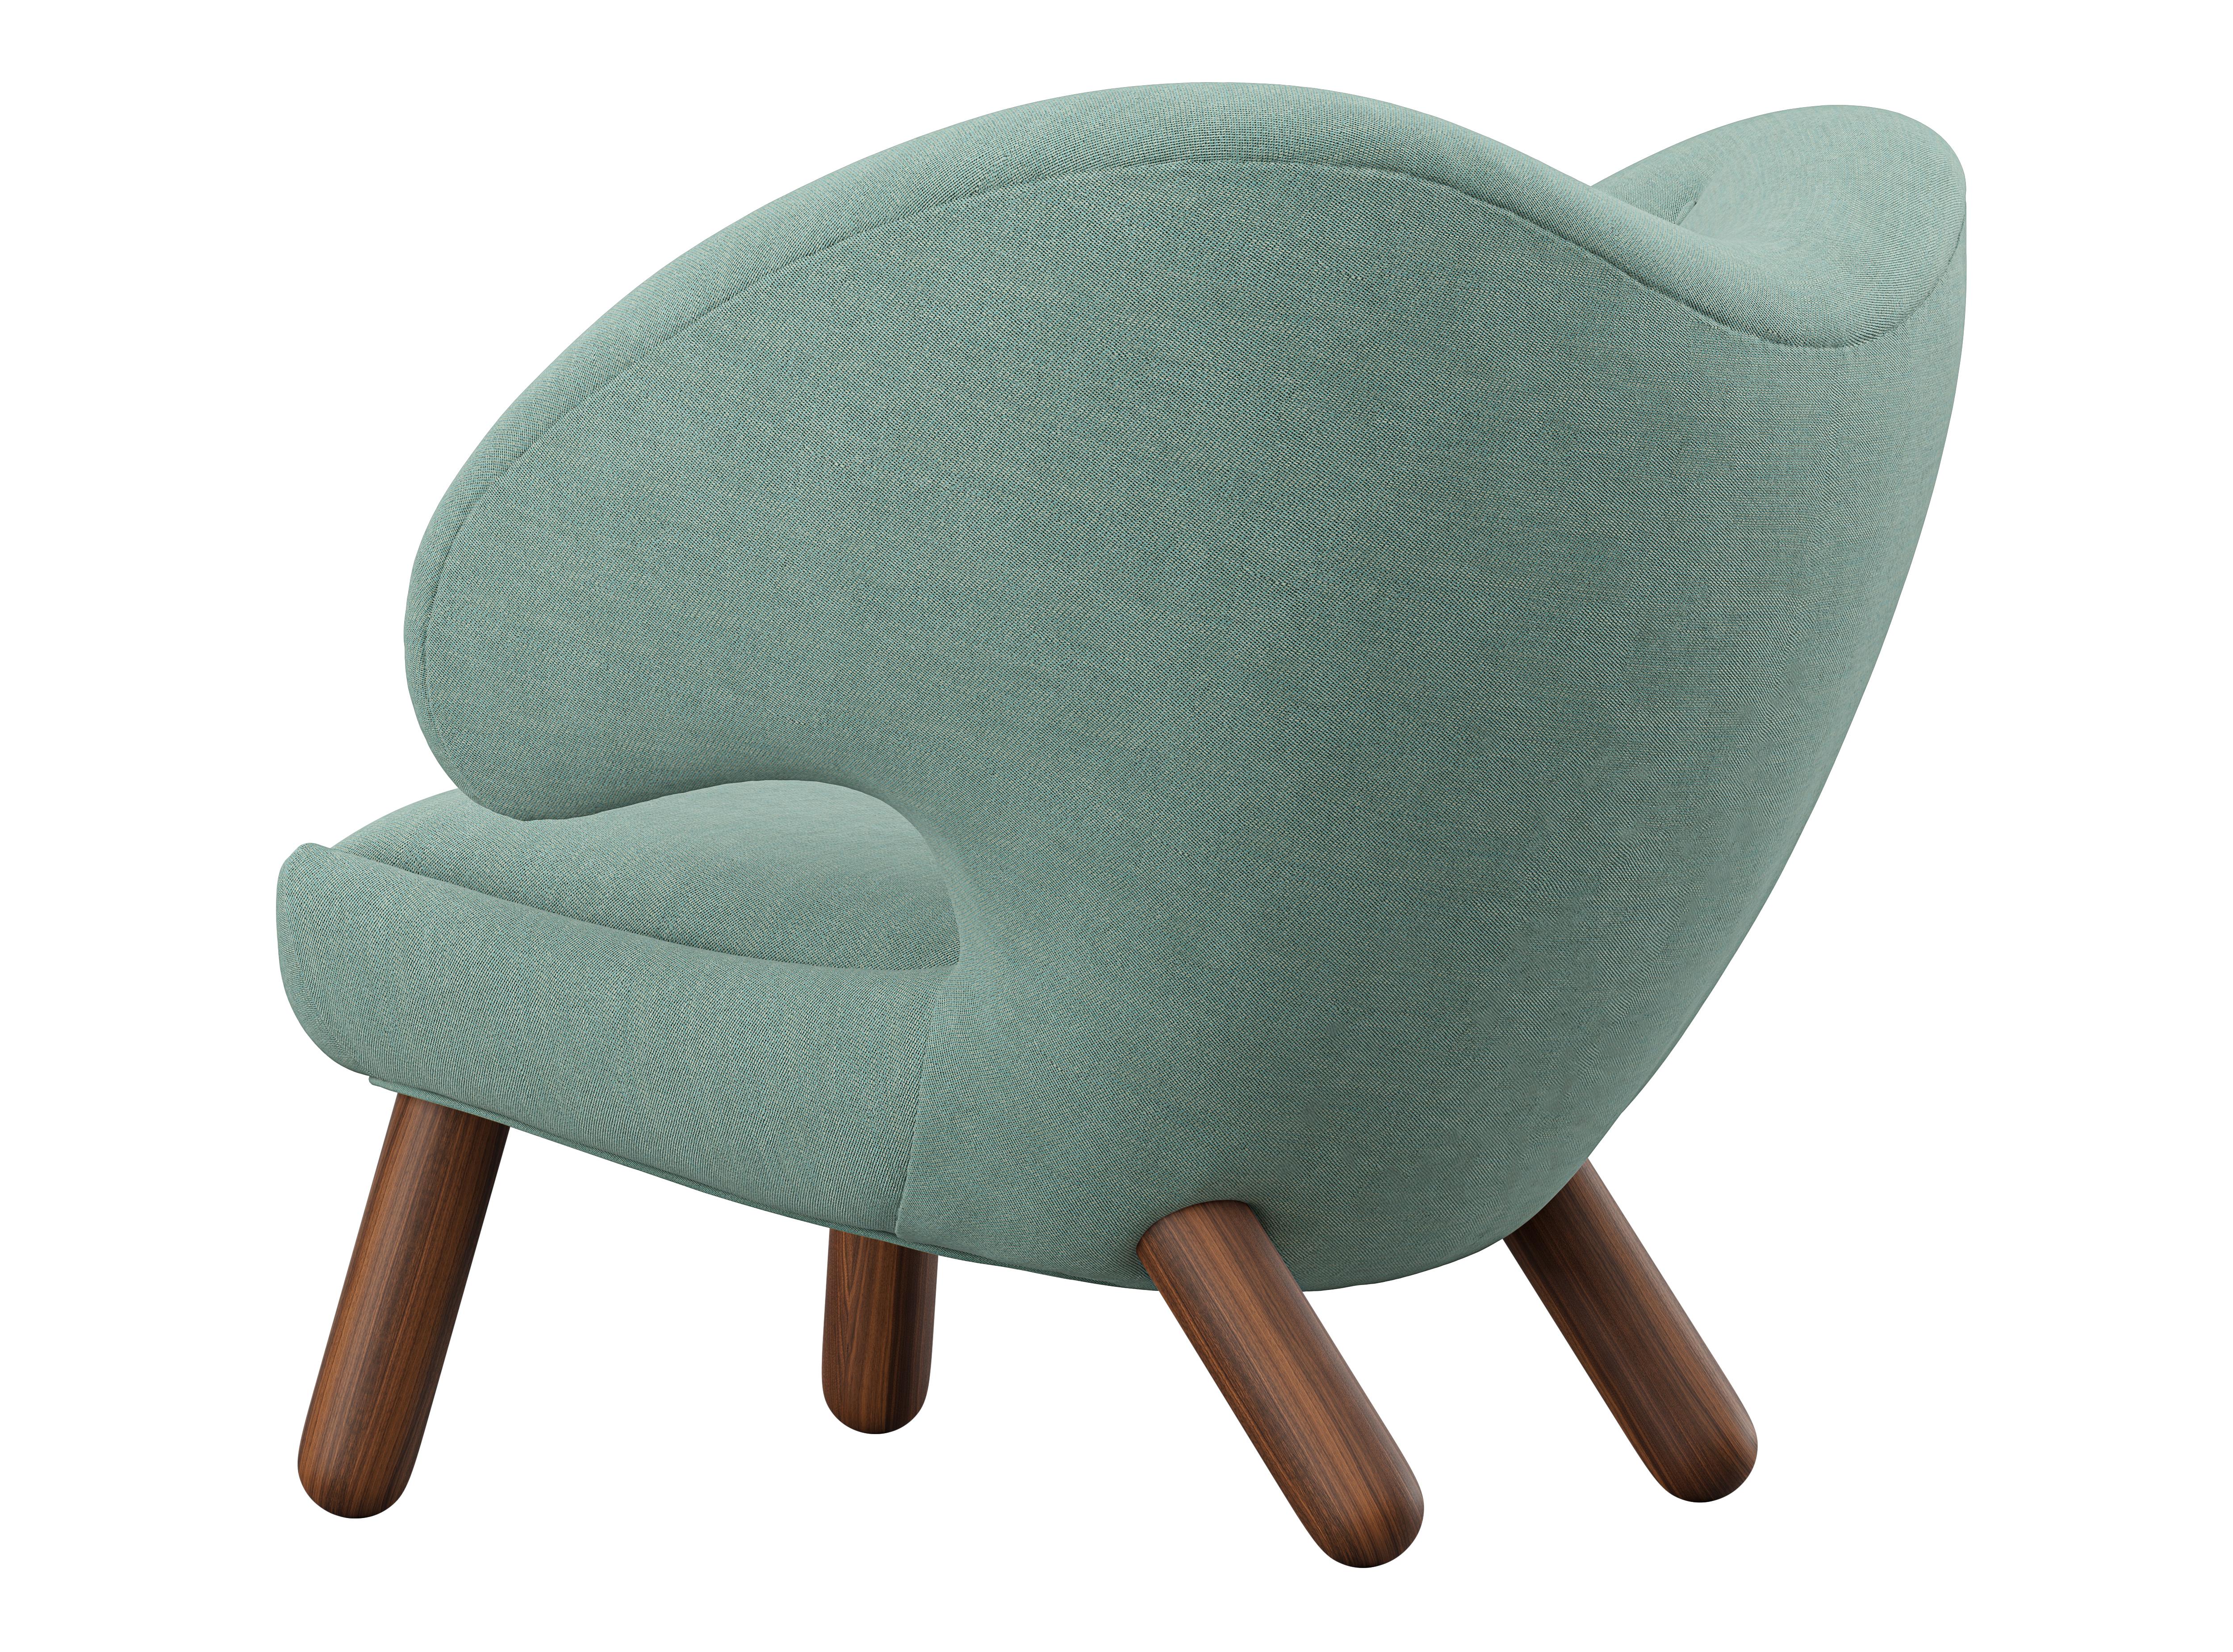 Modern Set of Two Finn Juhl Pelican Chair Upholstered in Wood and Fabric